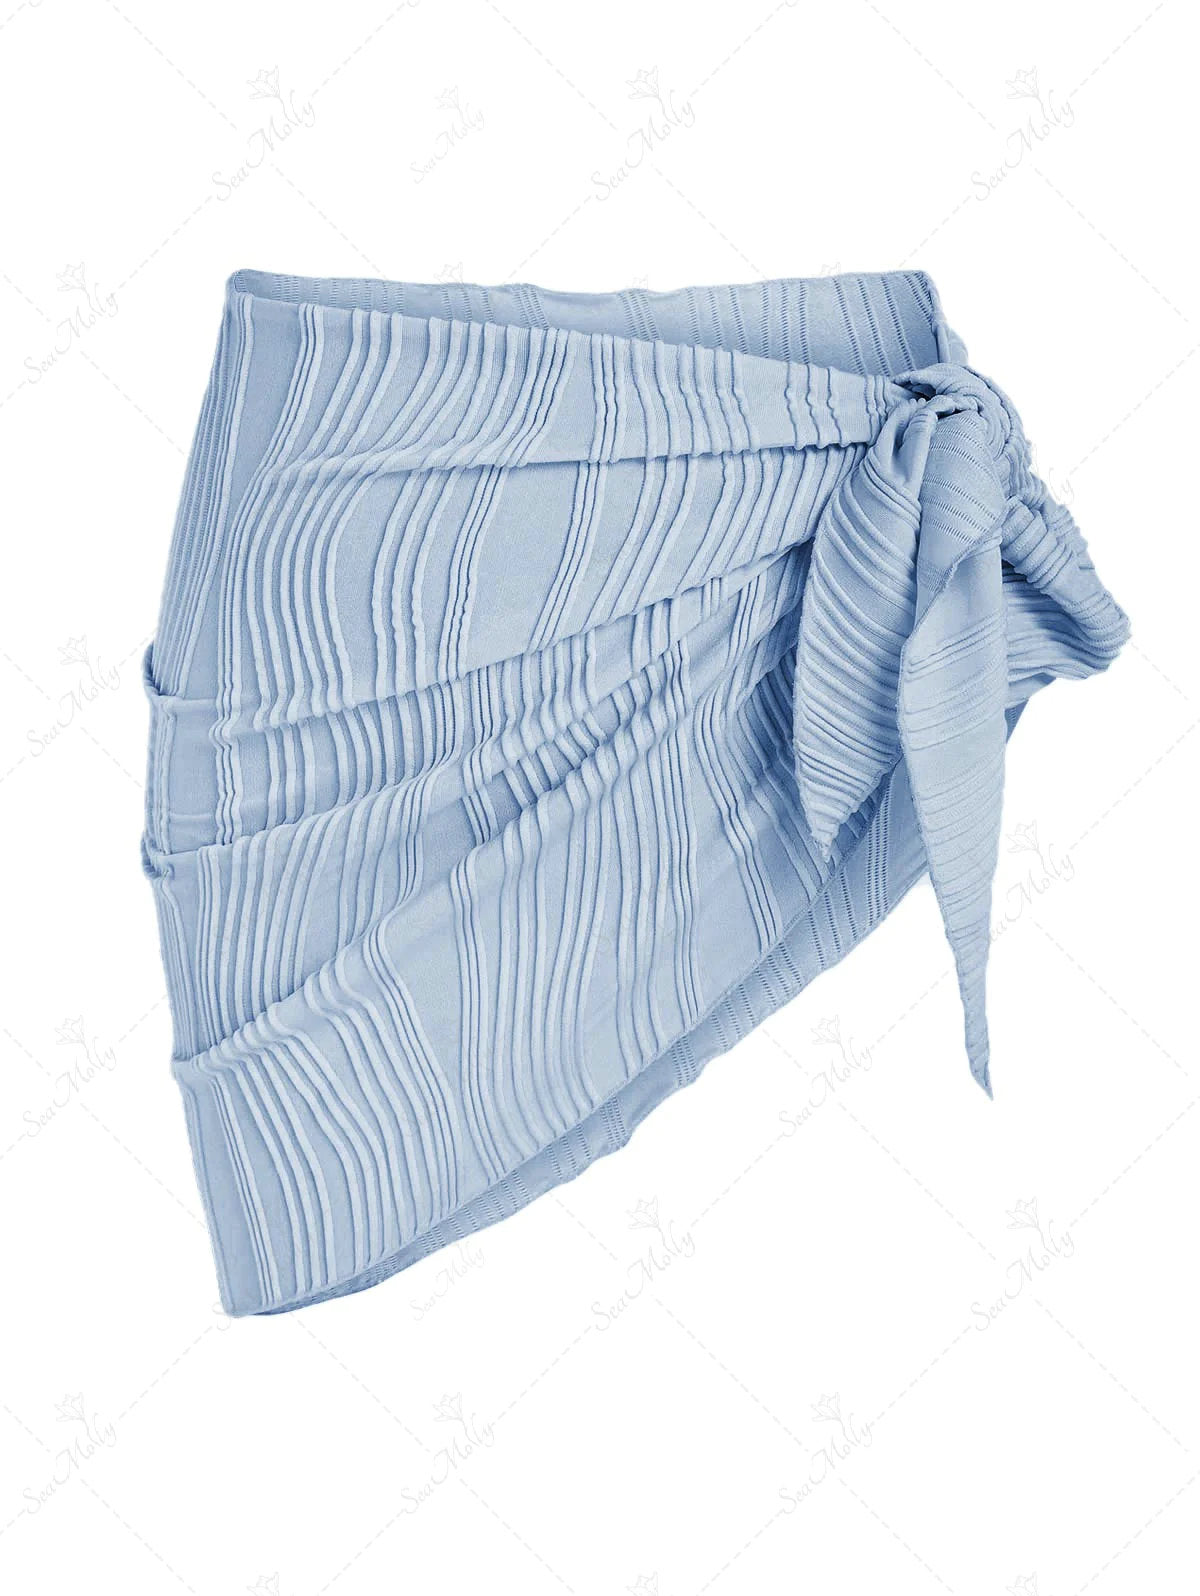 Seamolly Textured Tie Side Beach Sarong